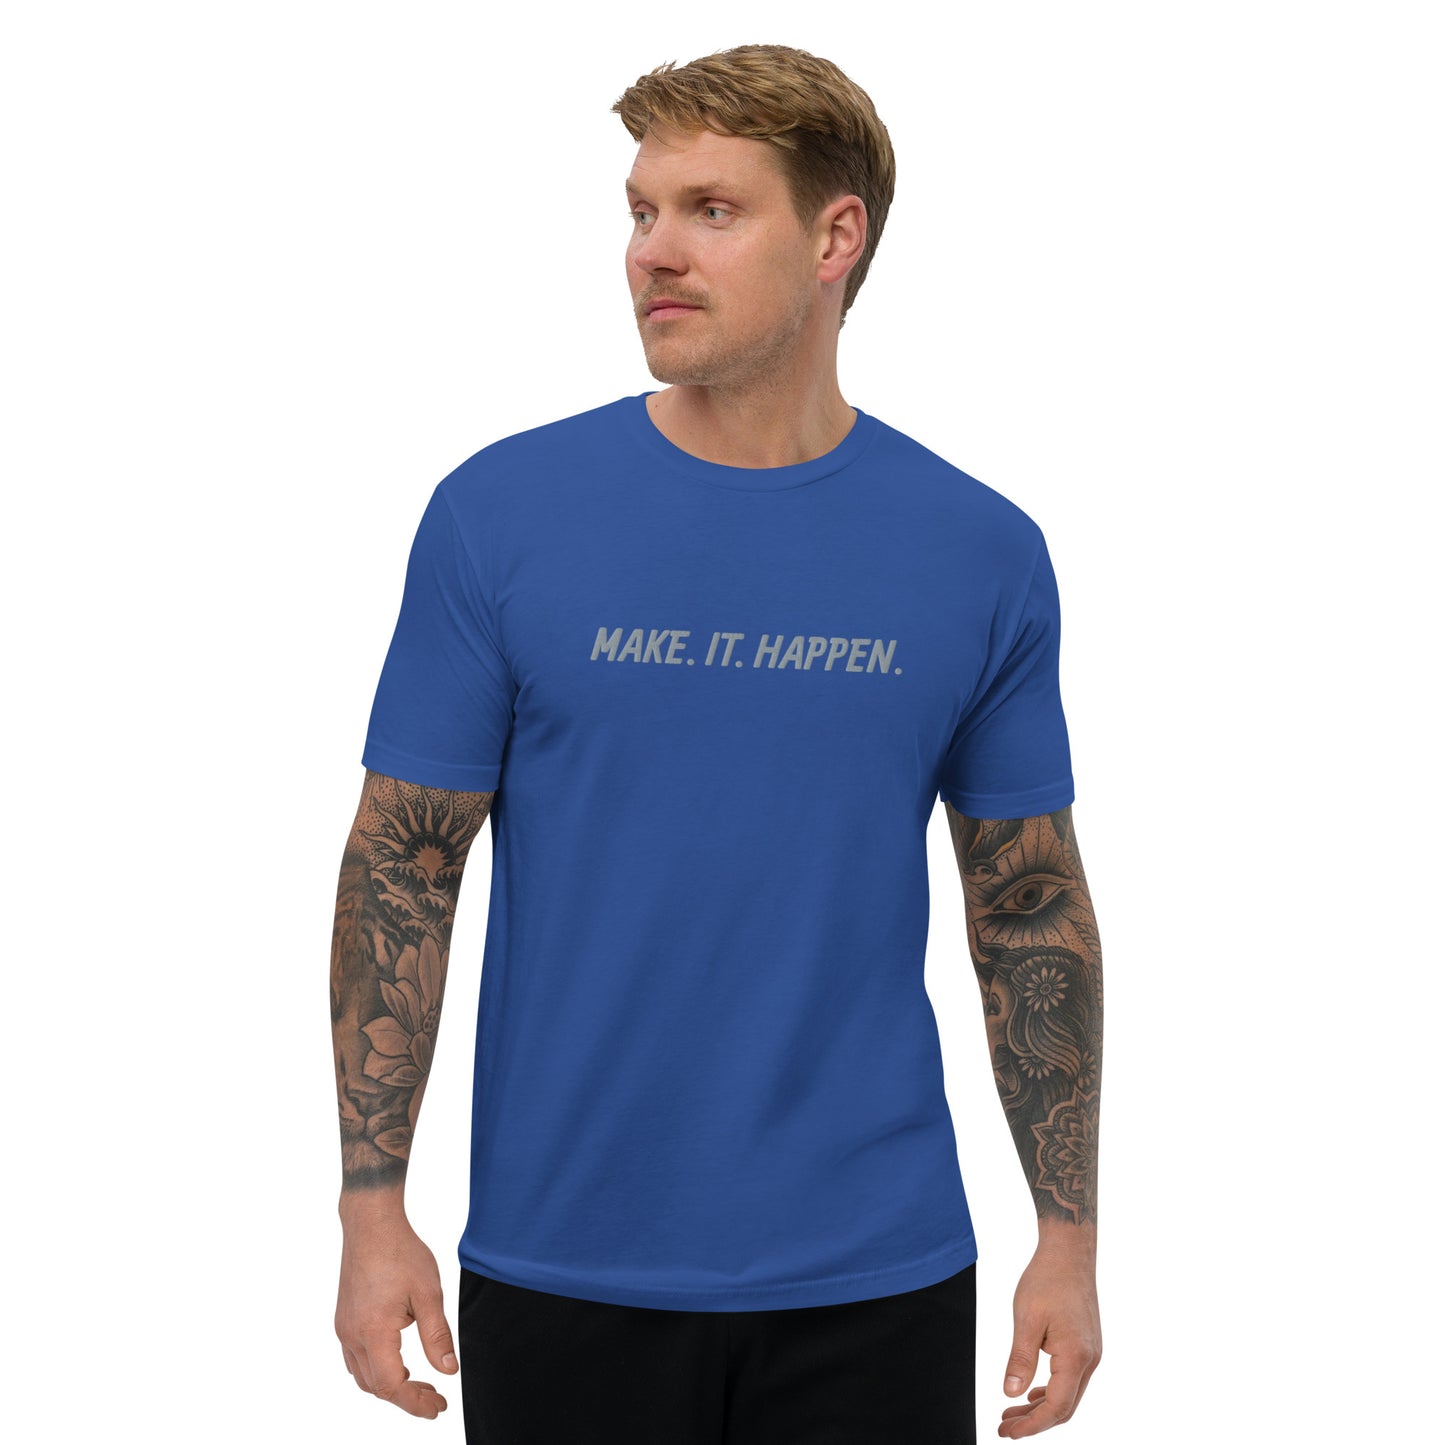 "MAKE. IT. HAPPEN." Embroidered T-shirt (Athletic Fit)